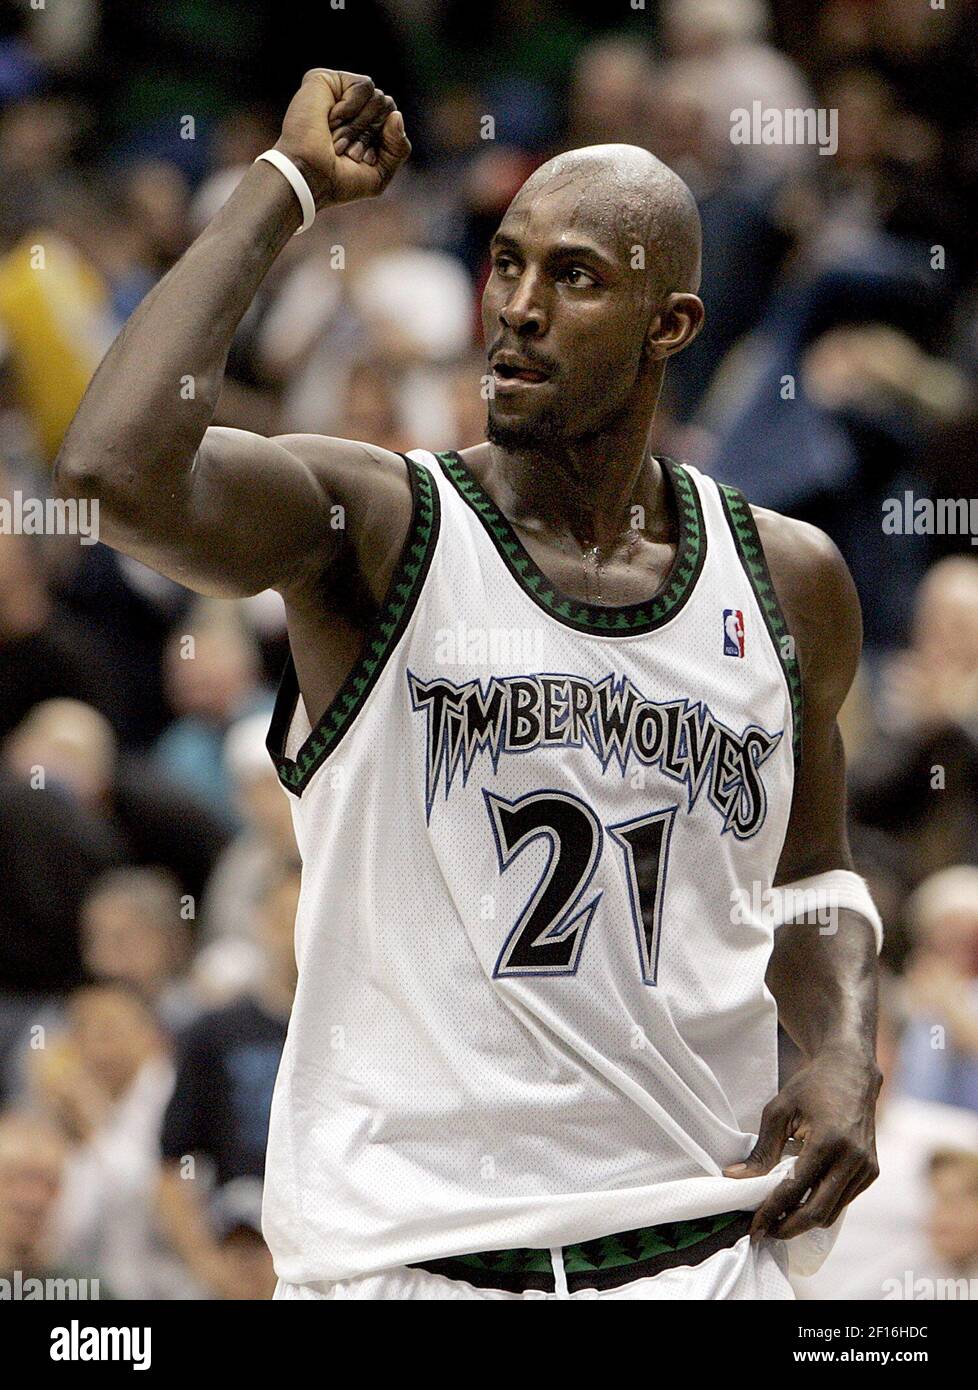 Left in Awe of 2x NBA Champion, Kevin Garnett Bows Down to Lakers Legend 2  Days After $304,000,000-Worth Stance - EssentiallySports